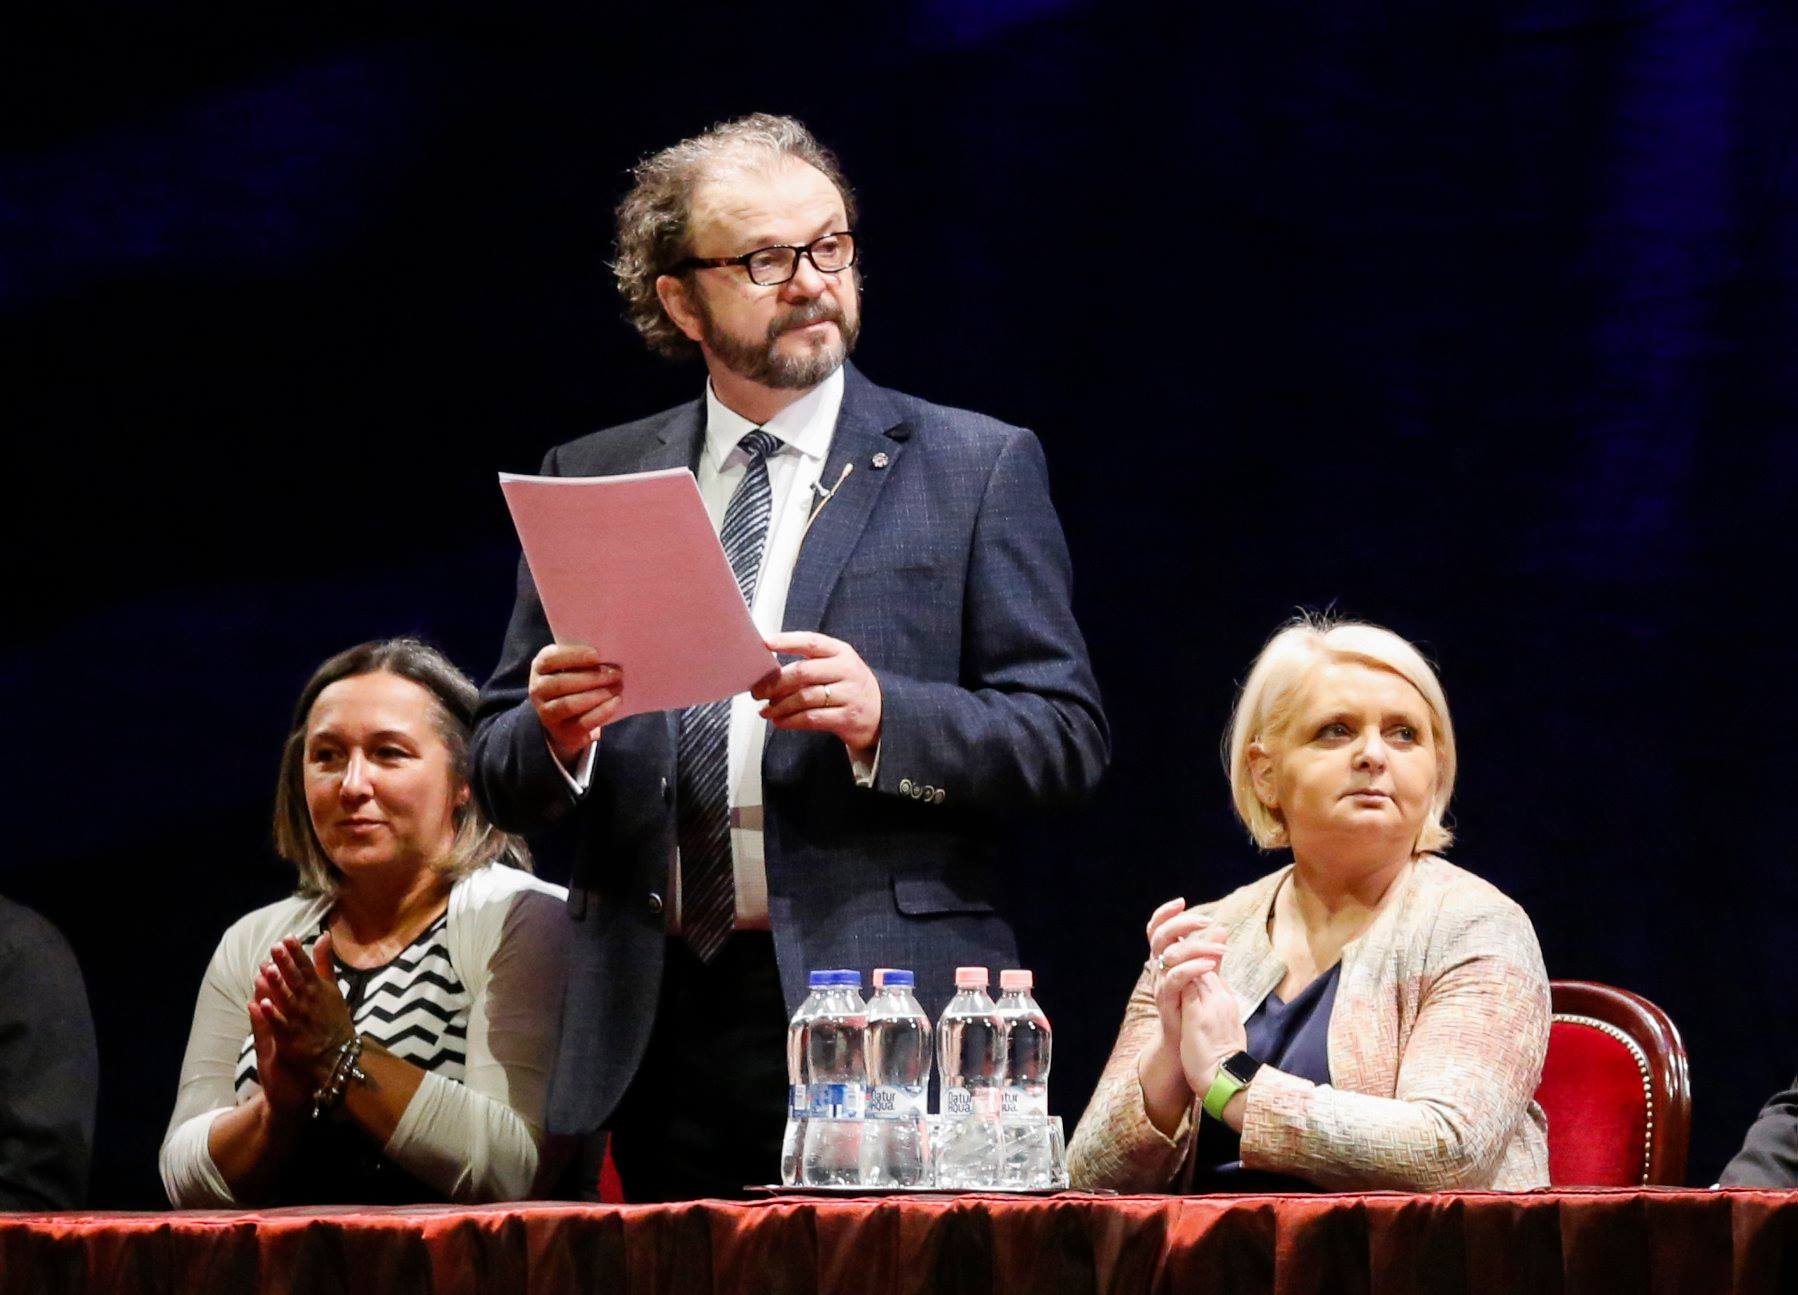 The presentation of the new director Attila Kiss B. at the Budapest Operetta Theater on February 2nd, 2019. (Photo: Budapest Operetta Theater)